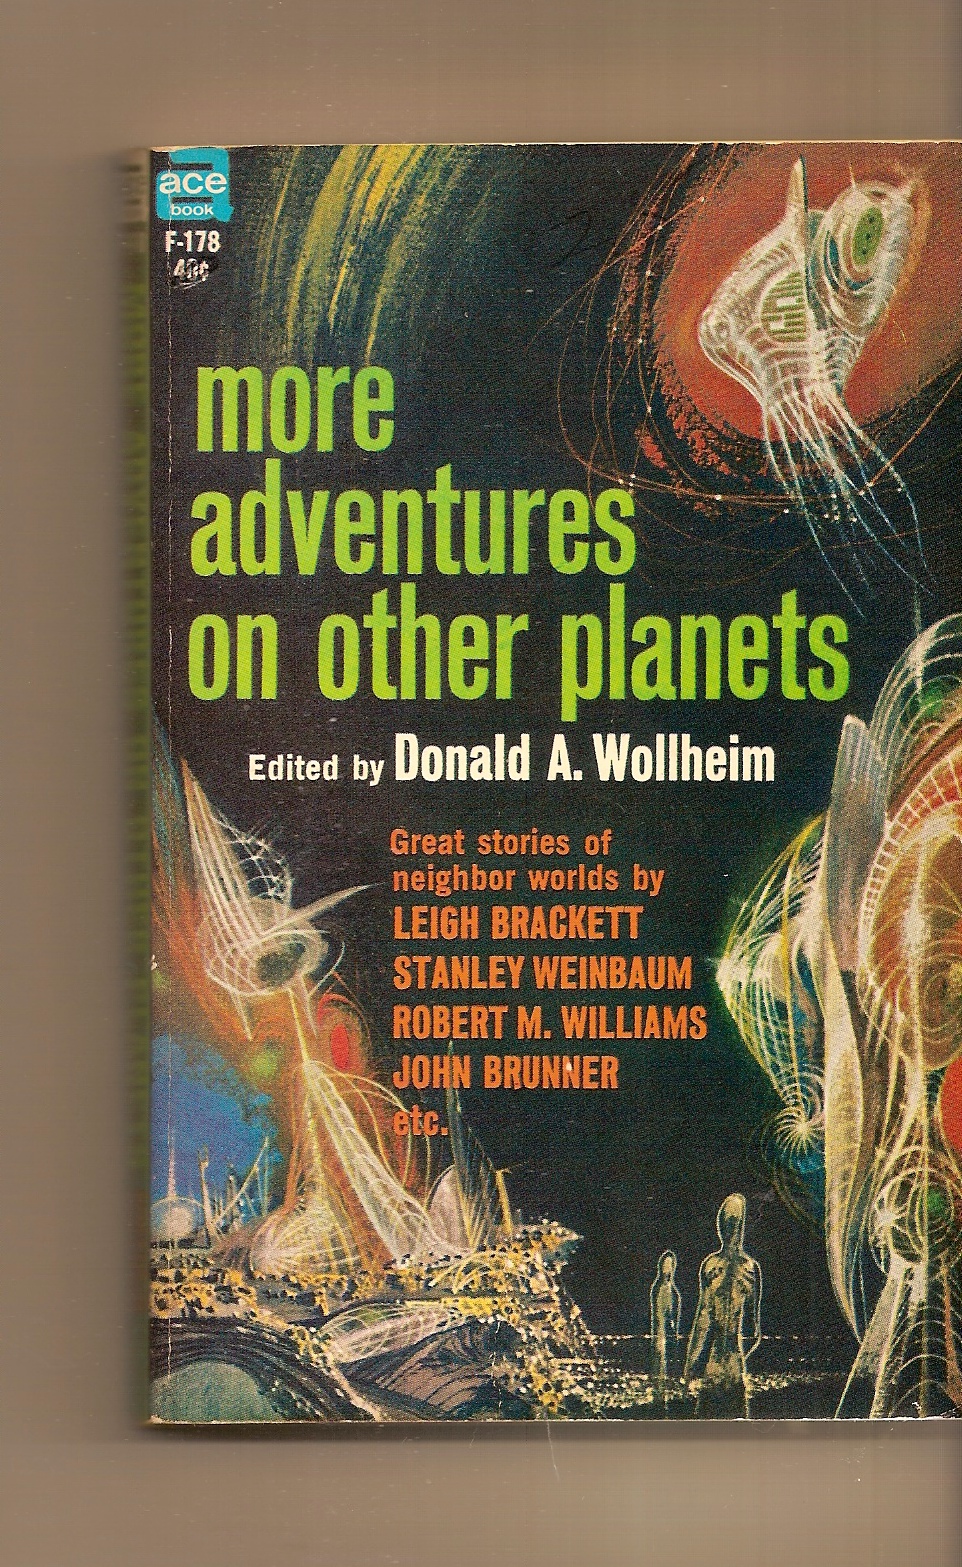 WOLLHEIM DONALD A. (EDITOR) - More Adventures on Other Planets Great Stories of Neighbor Worlds